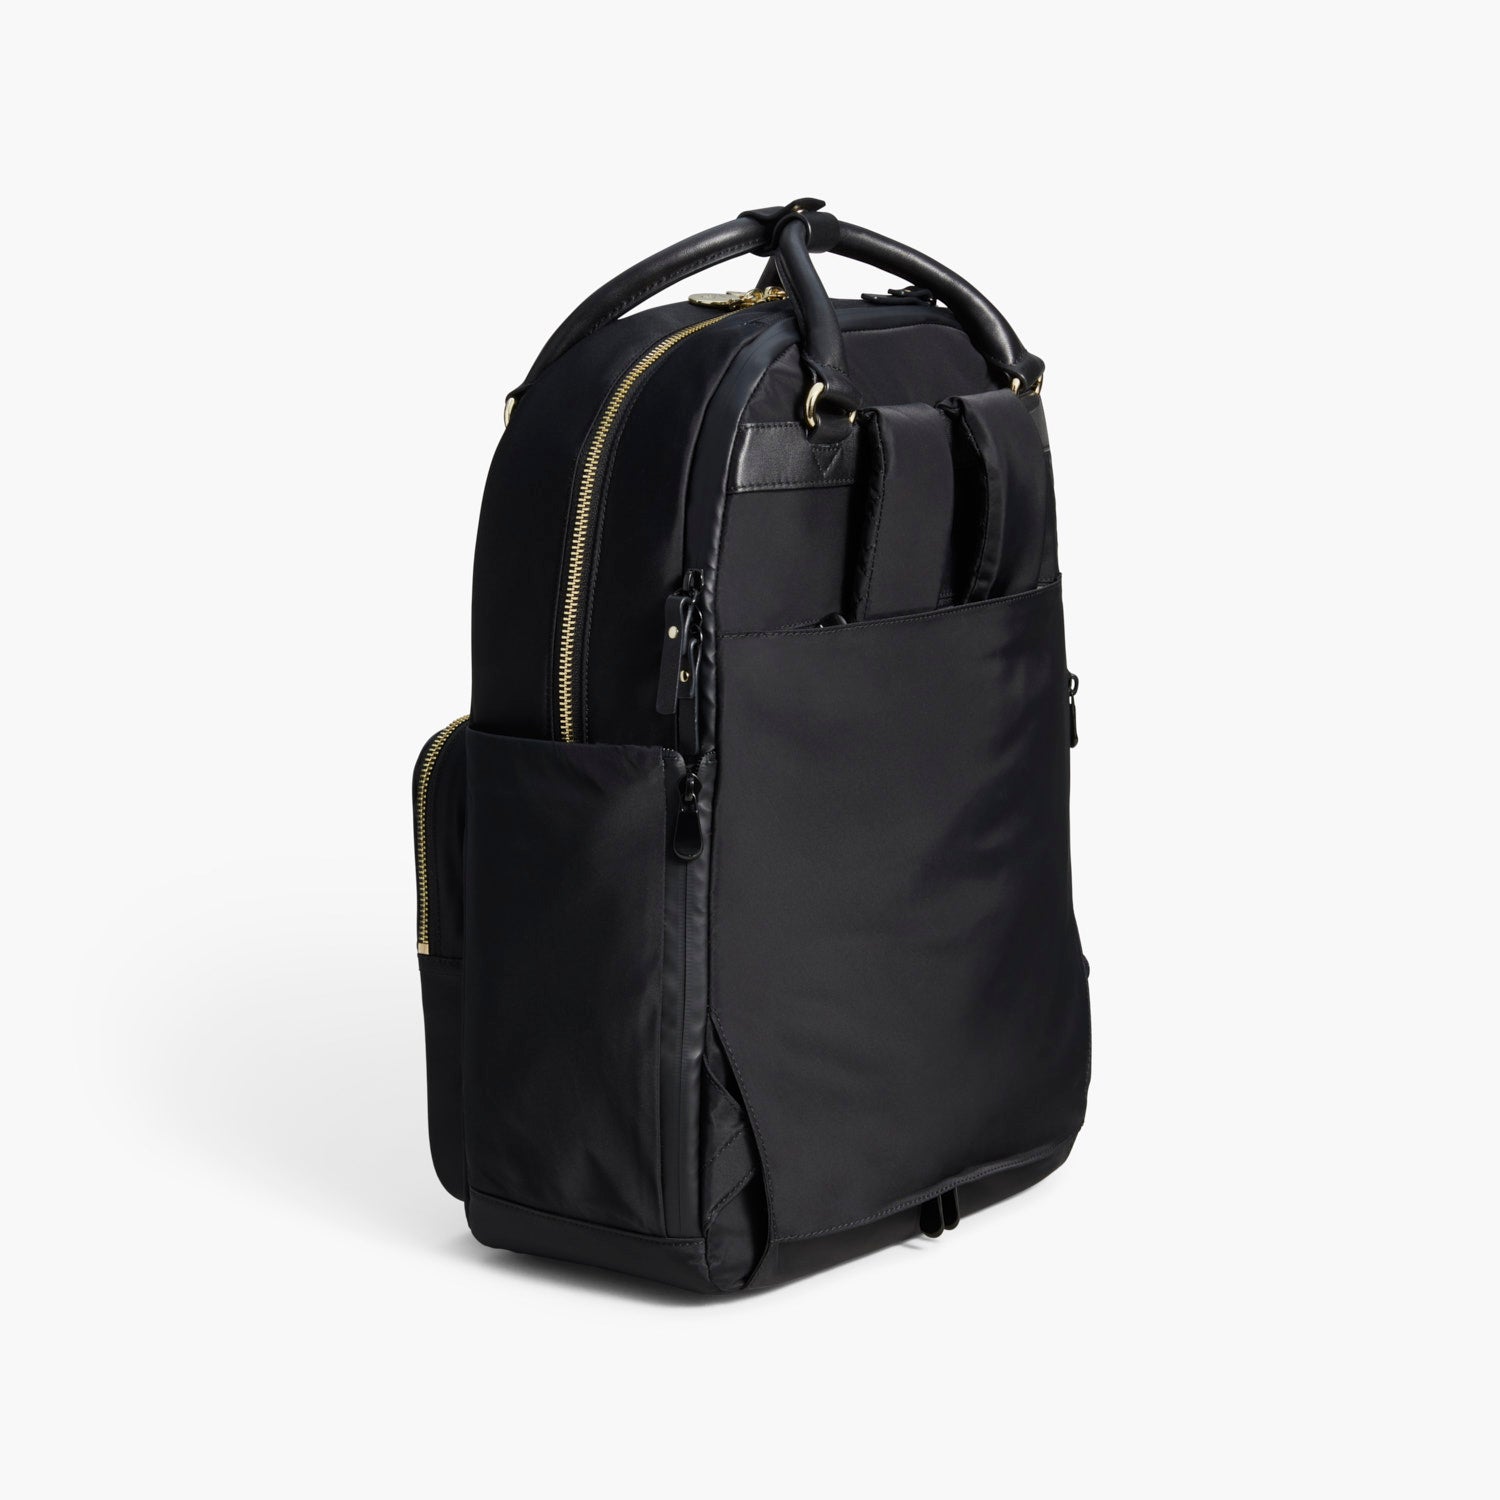 Lo & Sons Backpack Review: This Bag Makes Traveling With Two Laptops a  Breeze